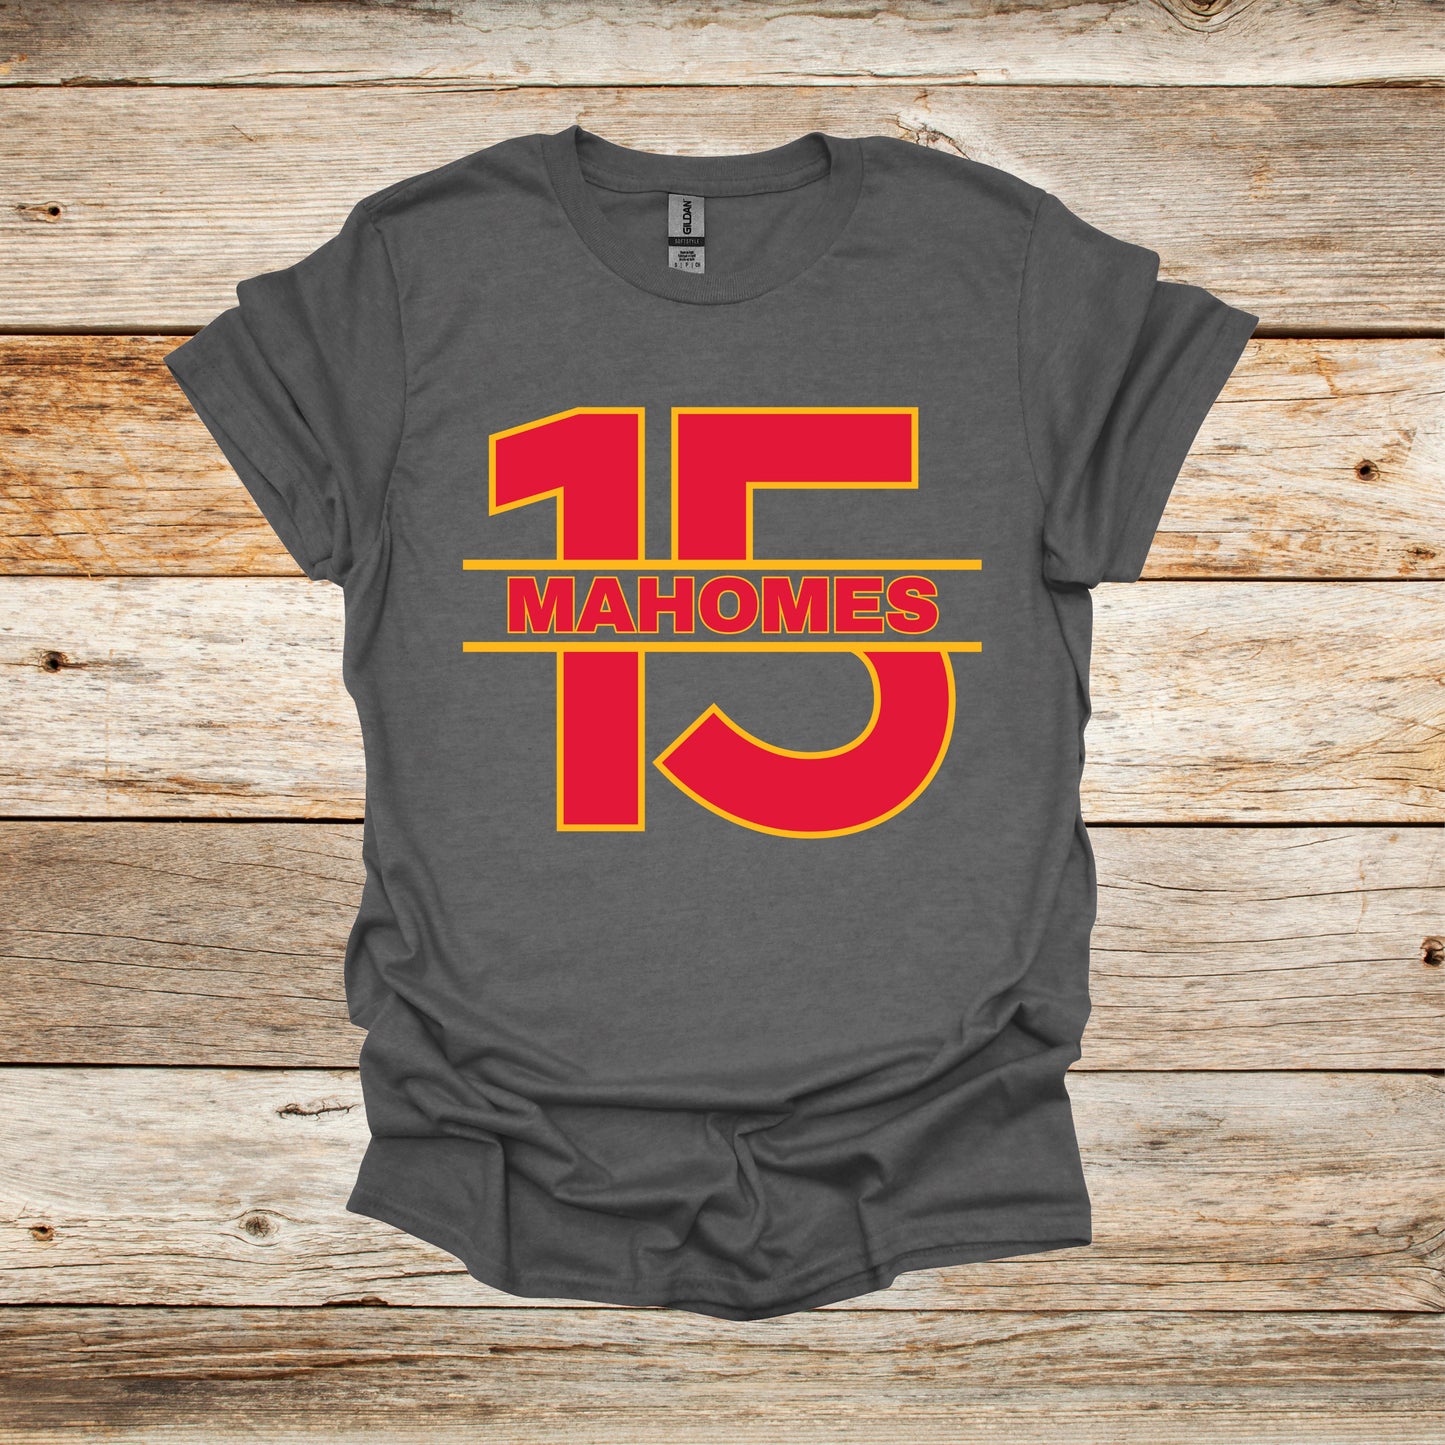 Football T-Shirt - Chiefs Football - 15 Mahomes - Adult and Children's Tee Shirts - Sports T-Shirts Graphic Avenue Graphite Heather Adult Small 